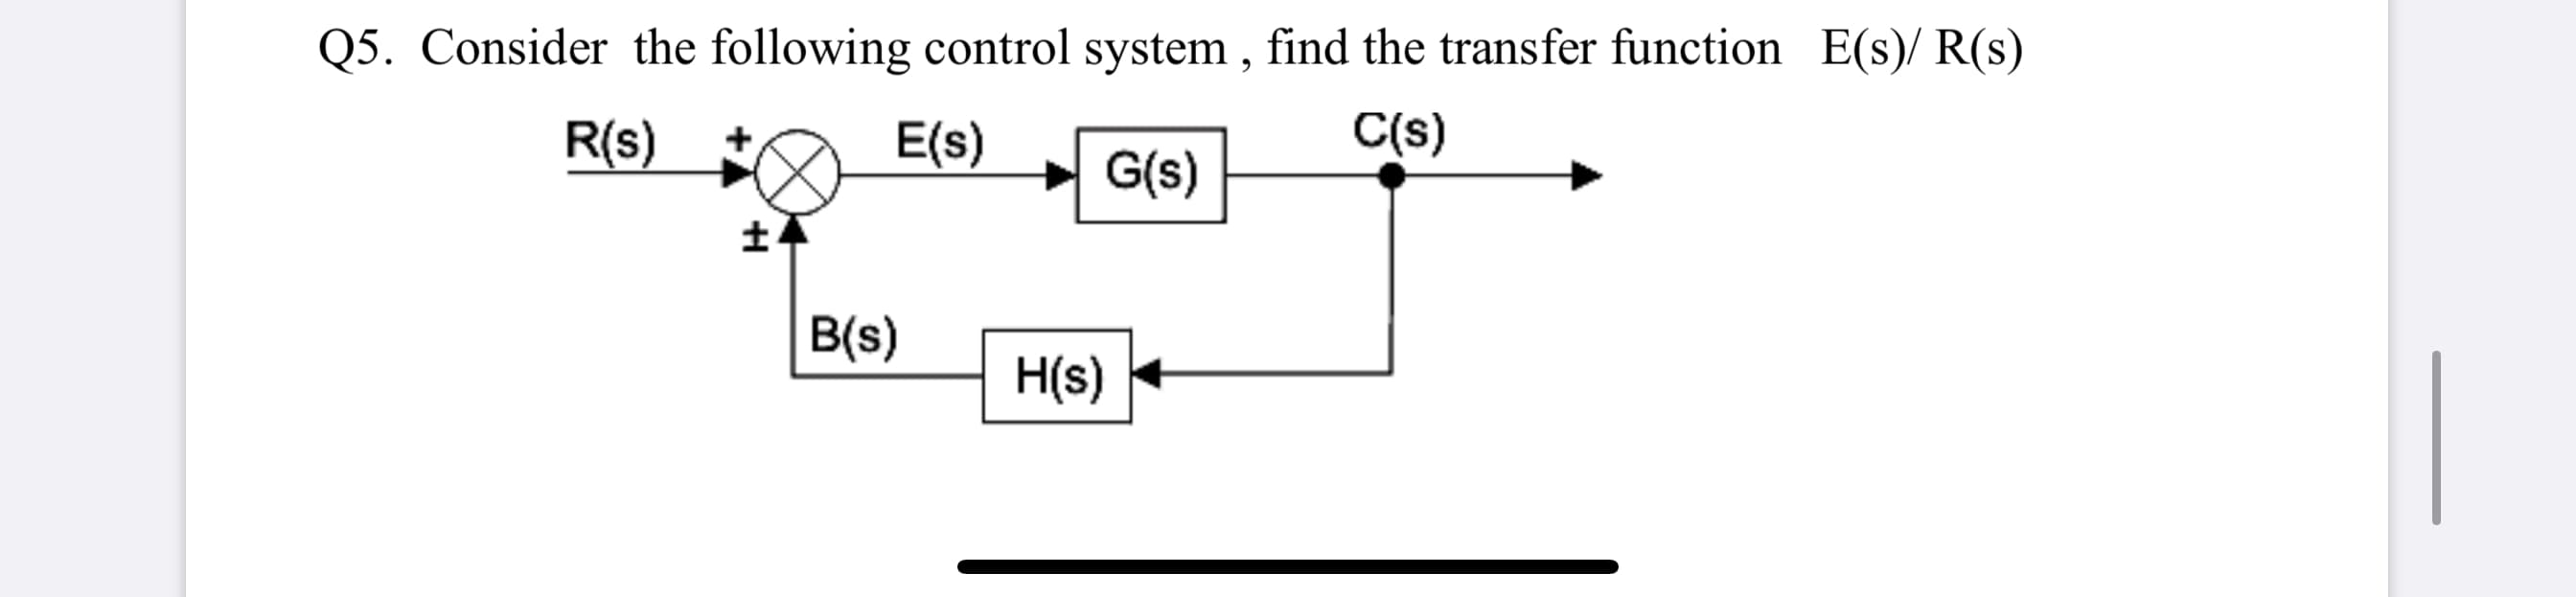 Q5. Consider the following control system , find the transfer function E(s)/ R(s)
R(s)
E(s)
C(s)
G(s)
B(s)
H(s)
